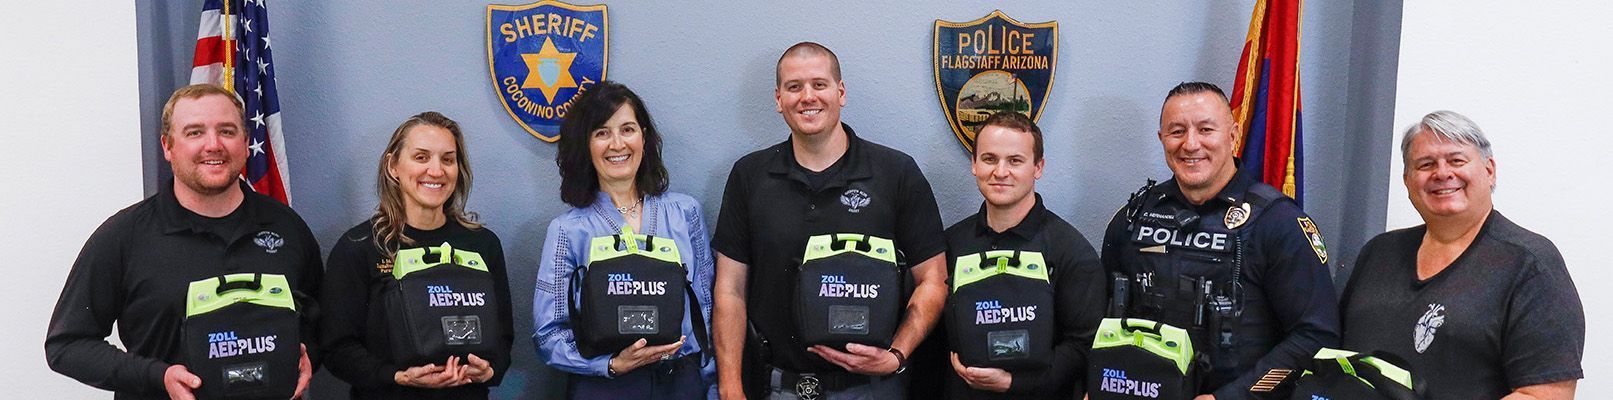 Participants in the Health First-funded Griffith Blue Heart program pose with AEDs in Flagstaff.